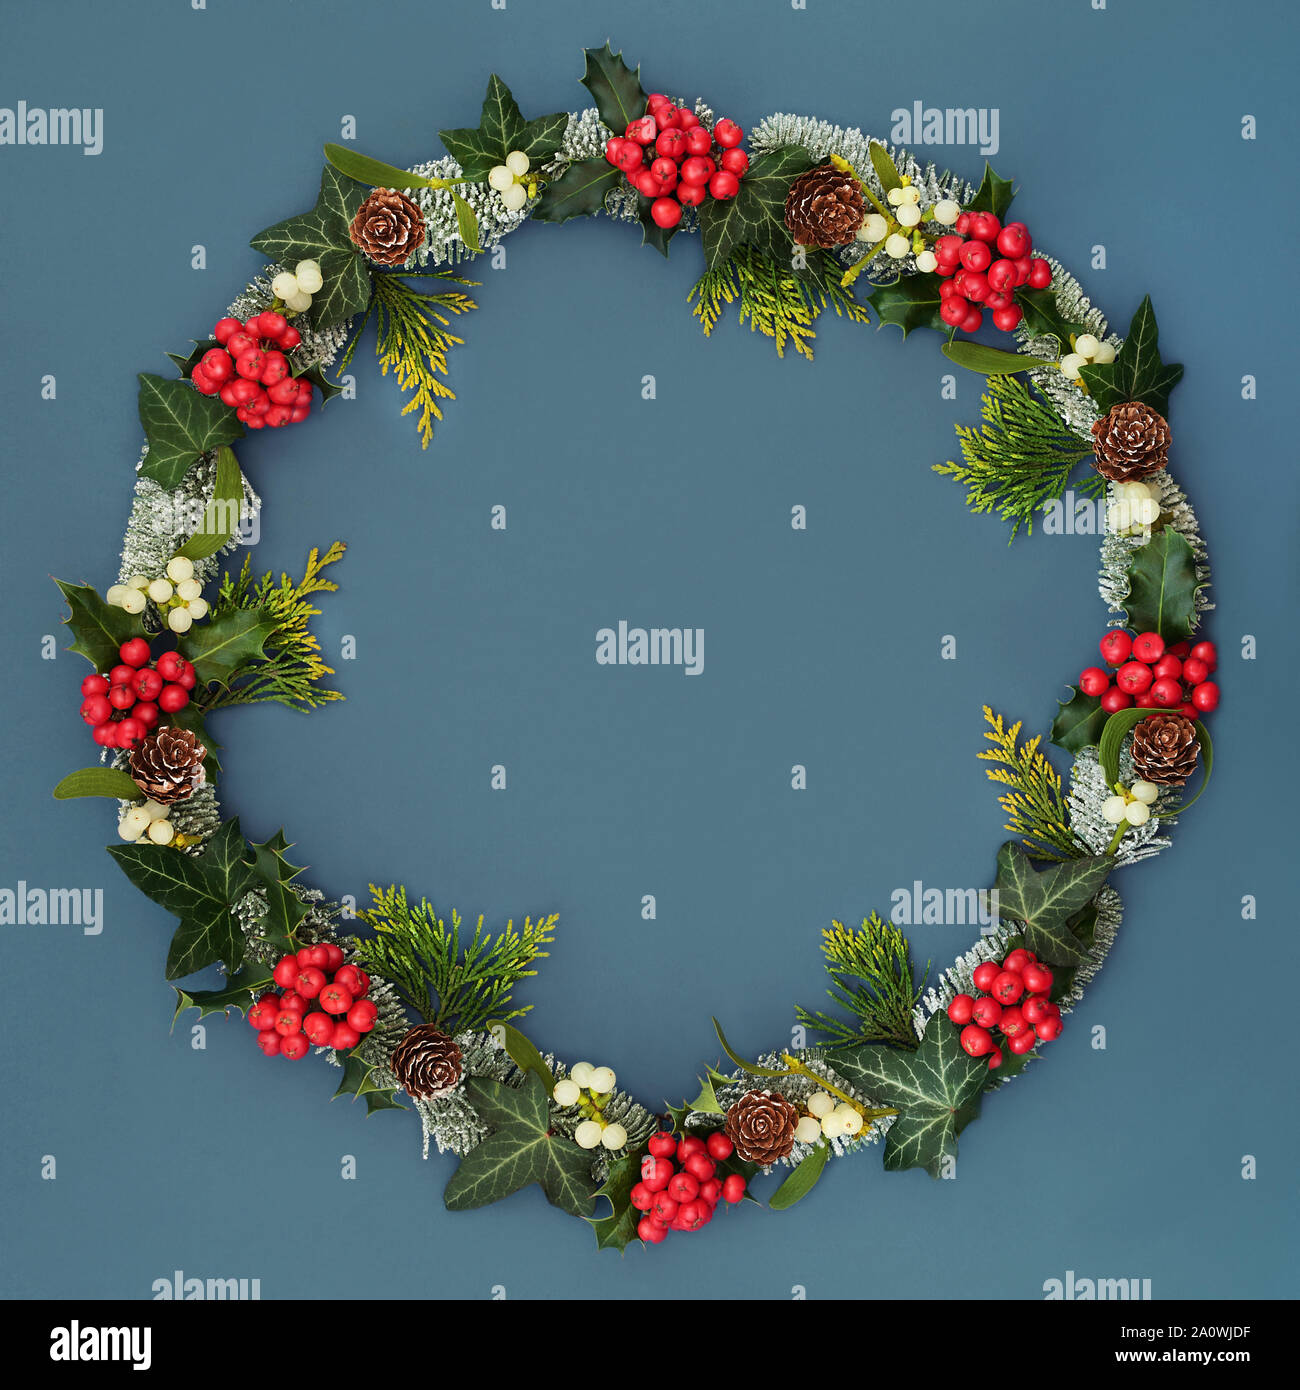 Christmas Parchment Blank Letter With Border Of Holly, Ivy And Mistletoe  Over Oak Background Stock Photo, Picture and Royalty Free Image. Image  21848073.